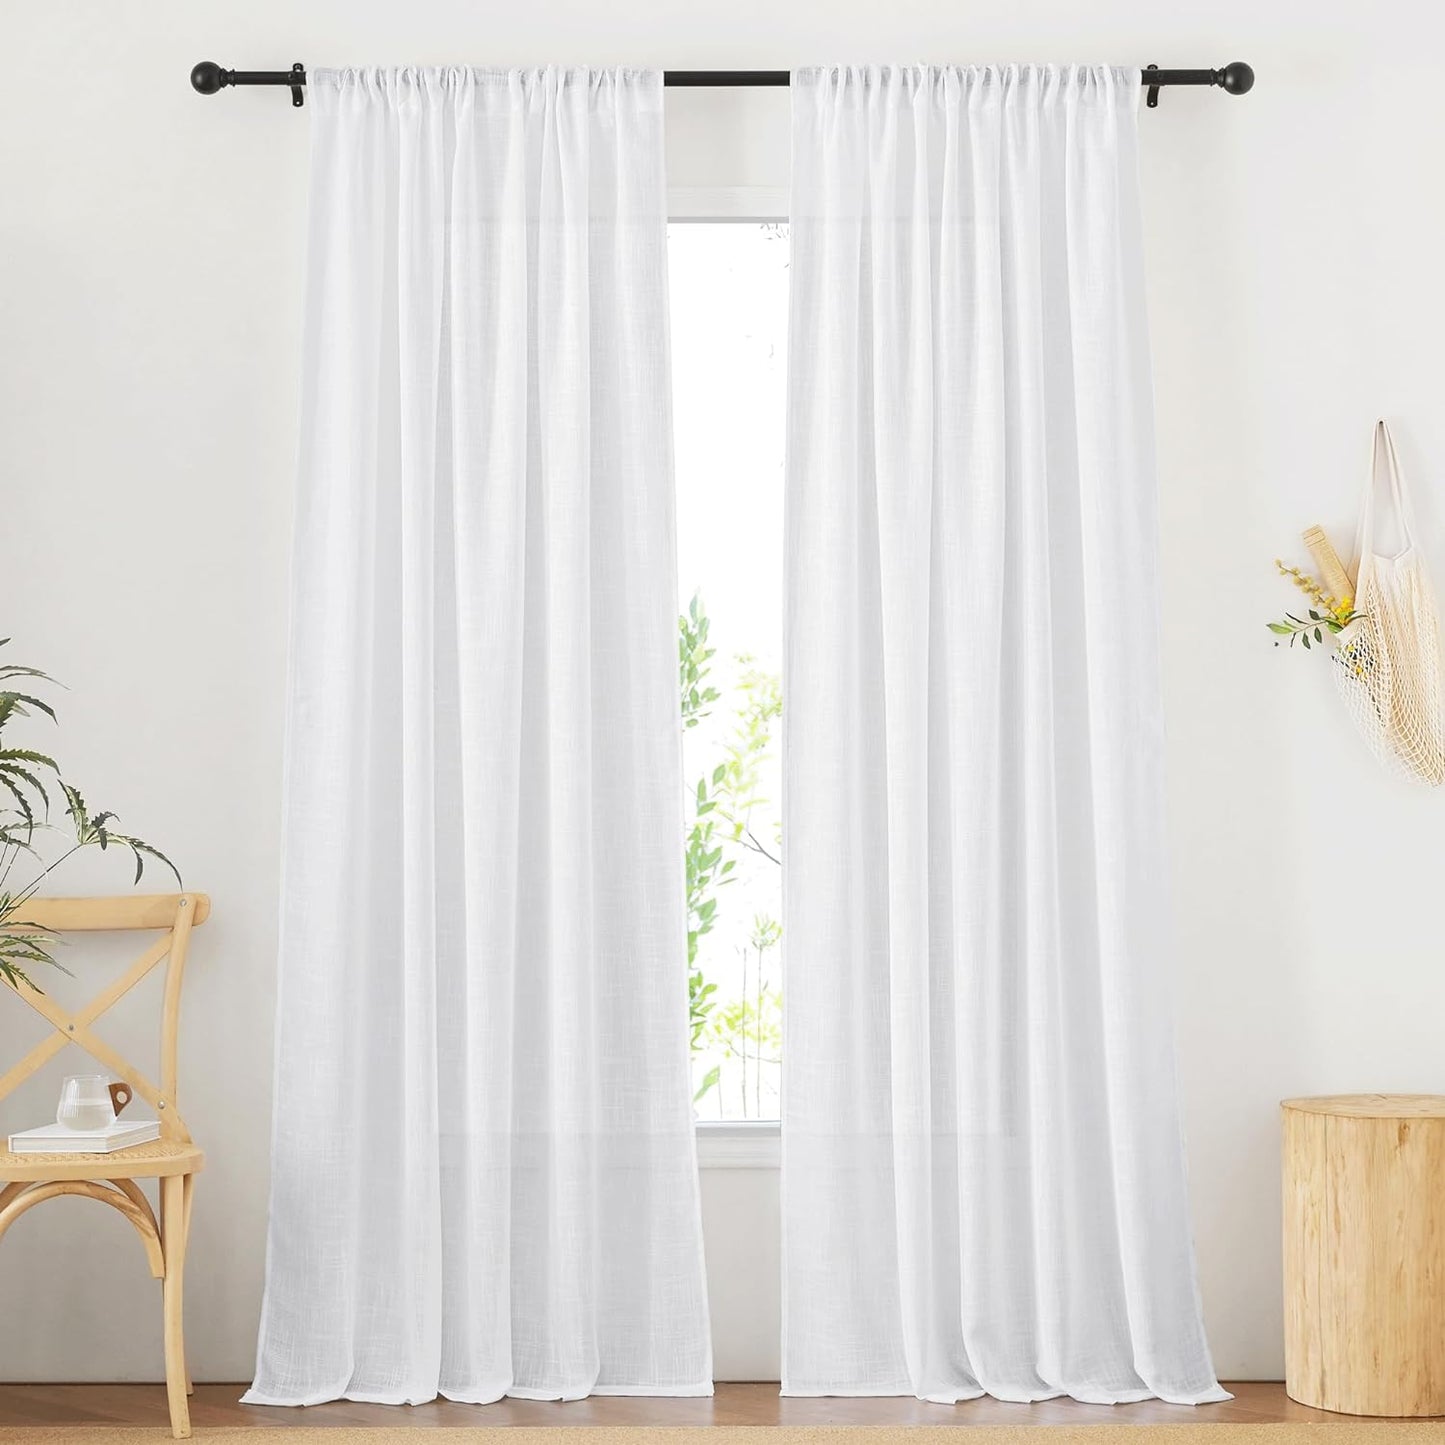 NICETOWN White Curtains Sheer - Semi Sheer Window Covering, Light & Airy Privacy Rod Pocket Back Tab Pinche Pleated Drapes for Bedroom Living Room Patio Glass Door, 52 X 63 Inches Long, Set of 2  NICETOWN White W52 X L108 